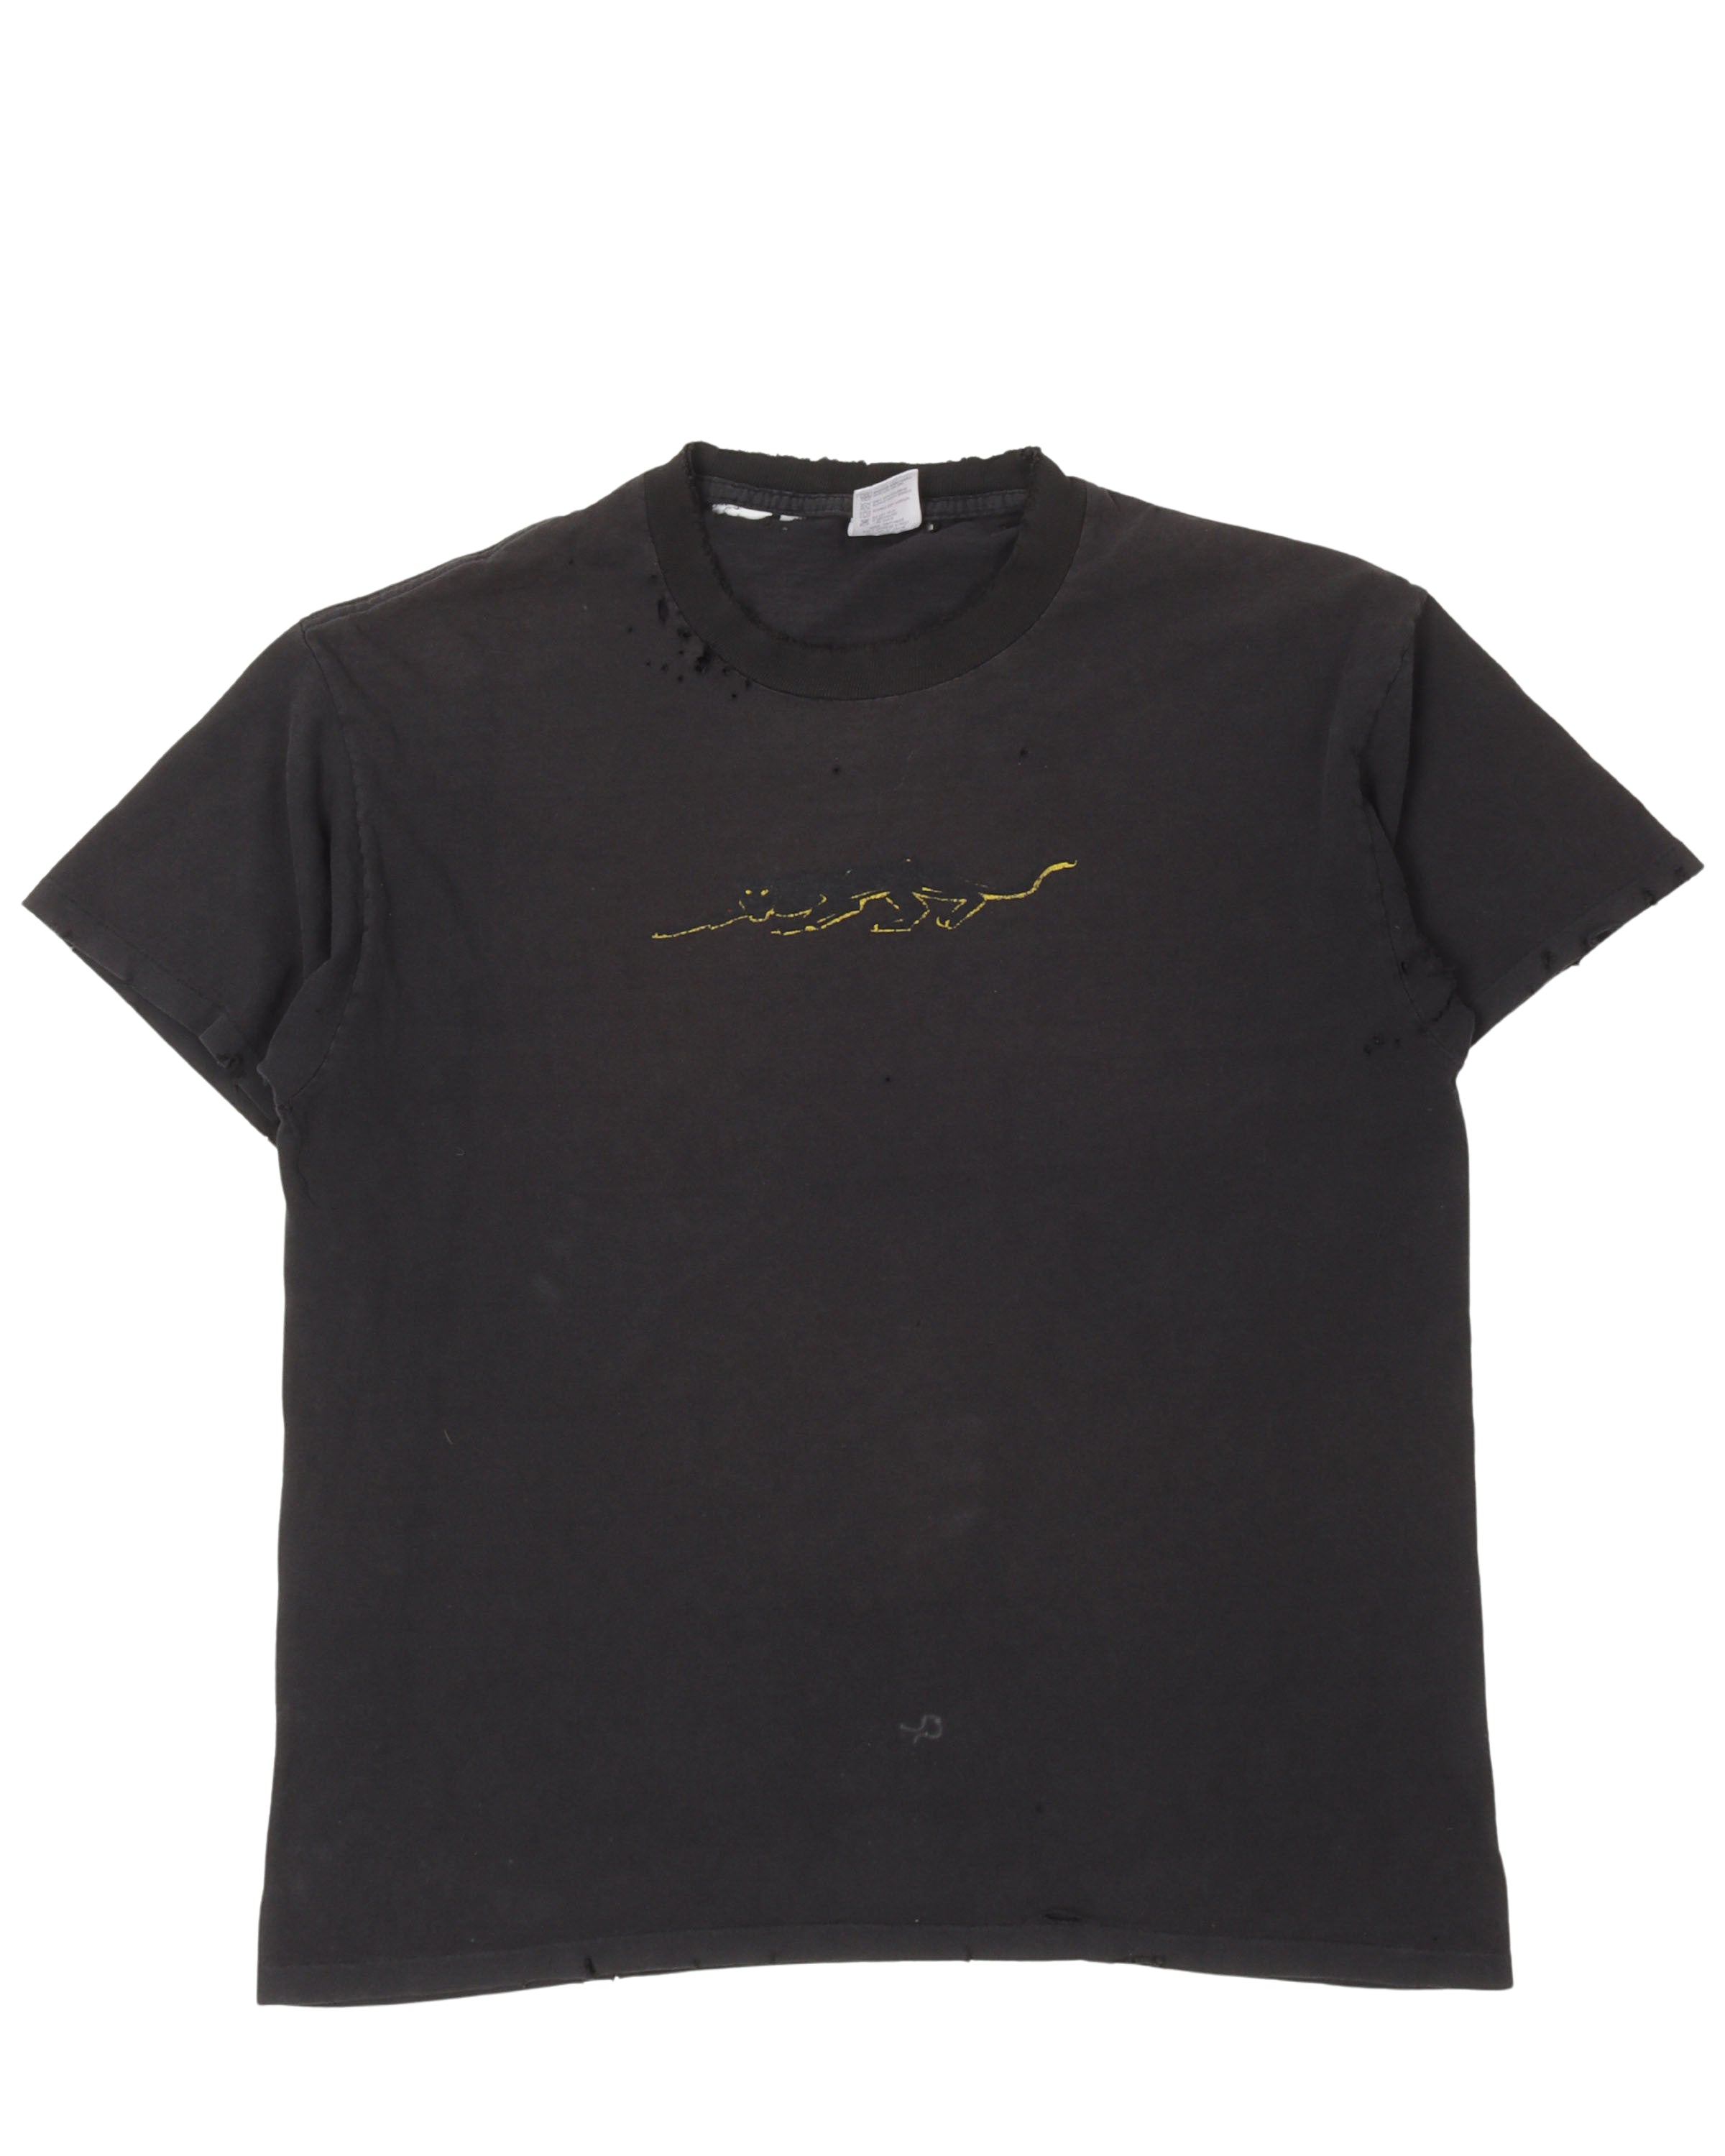 Panther Distressed T-Shirt